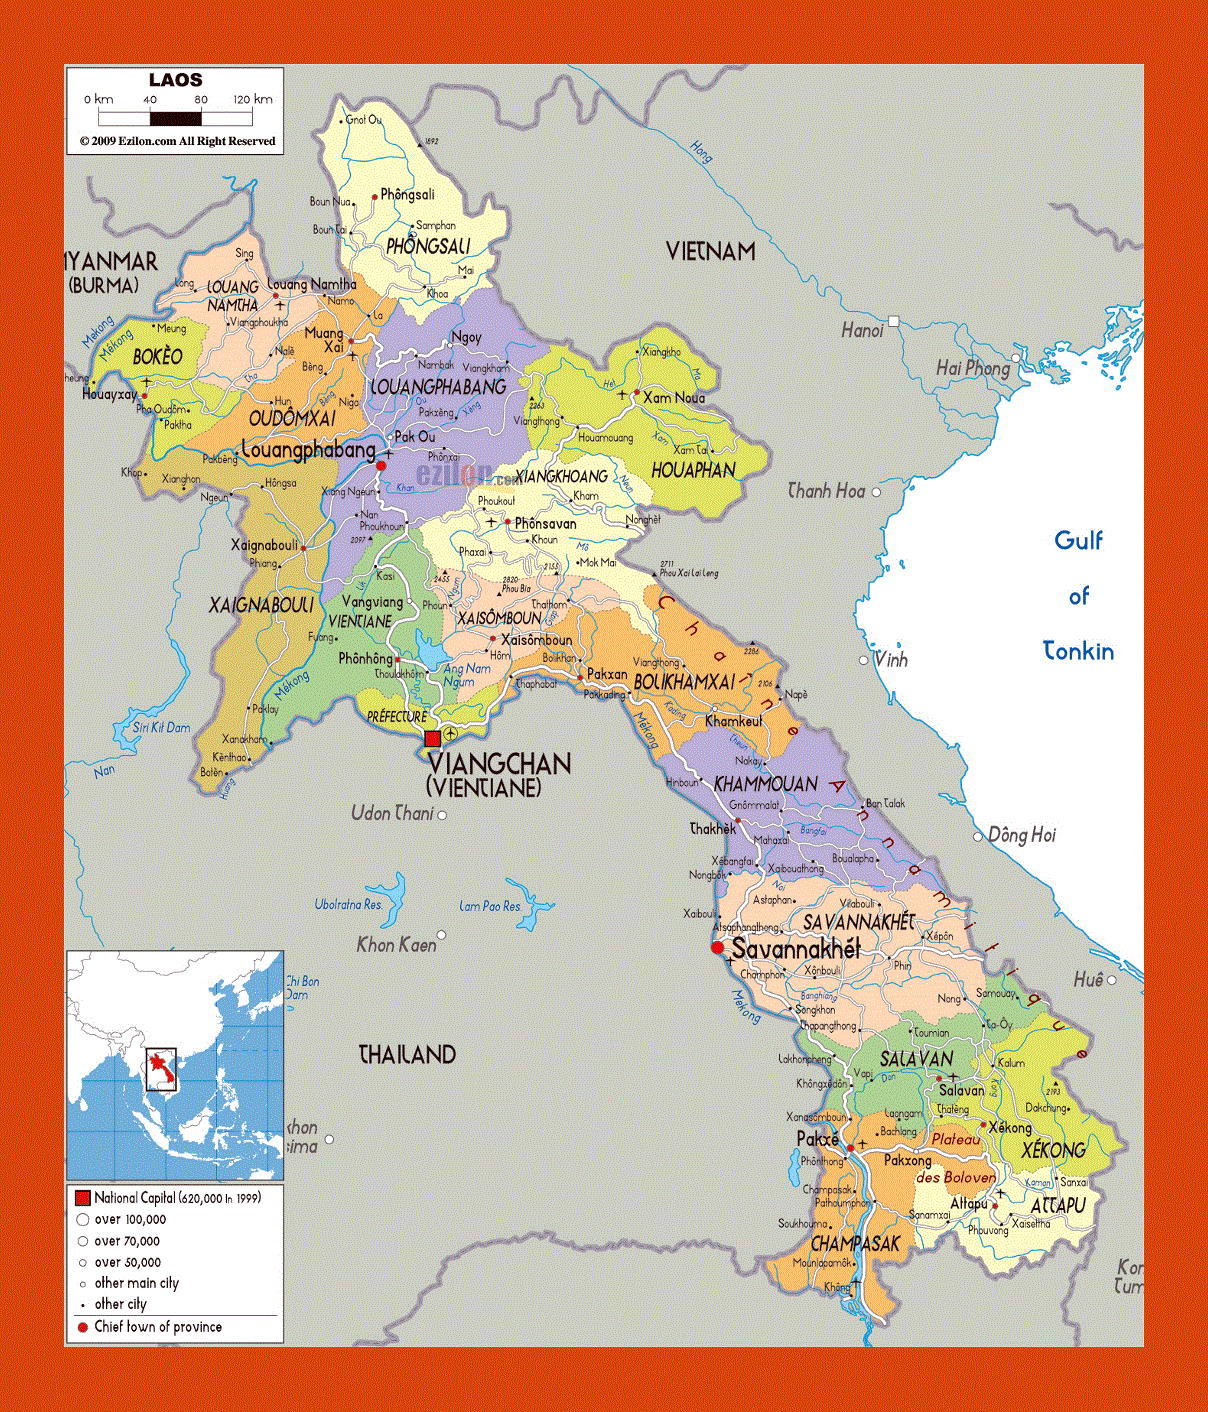 Political and administrative map of Laos